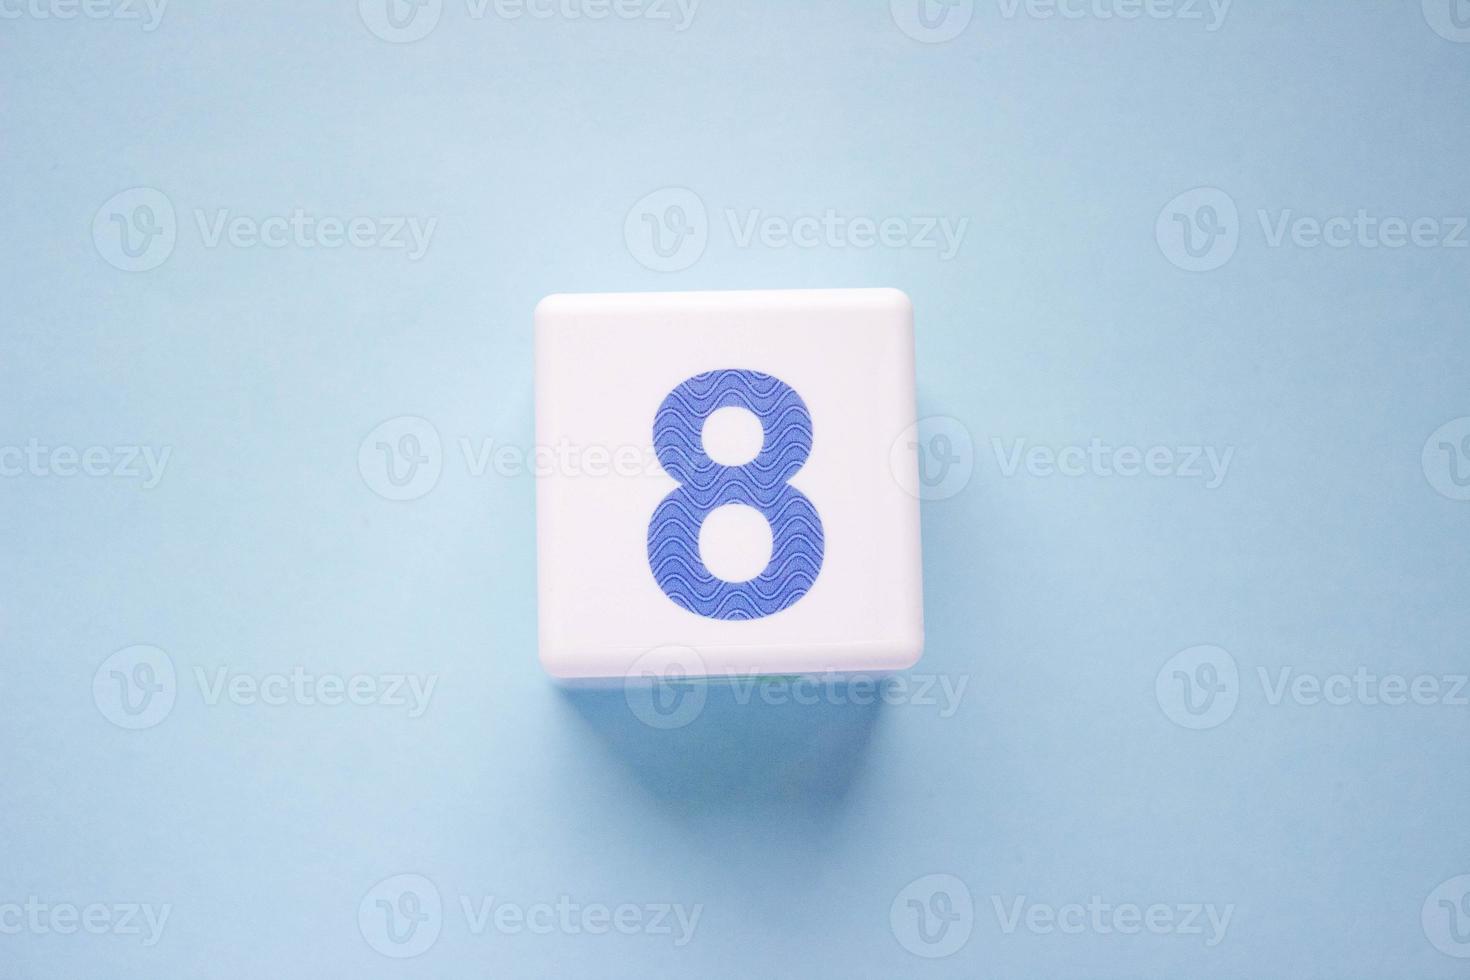 Close-up photo of a white plastic cube with a blue number 8 on a blue background. Object in the center of the photo